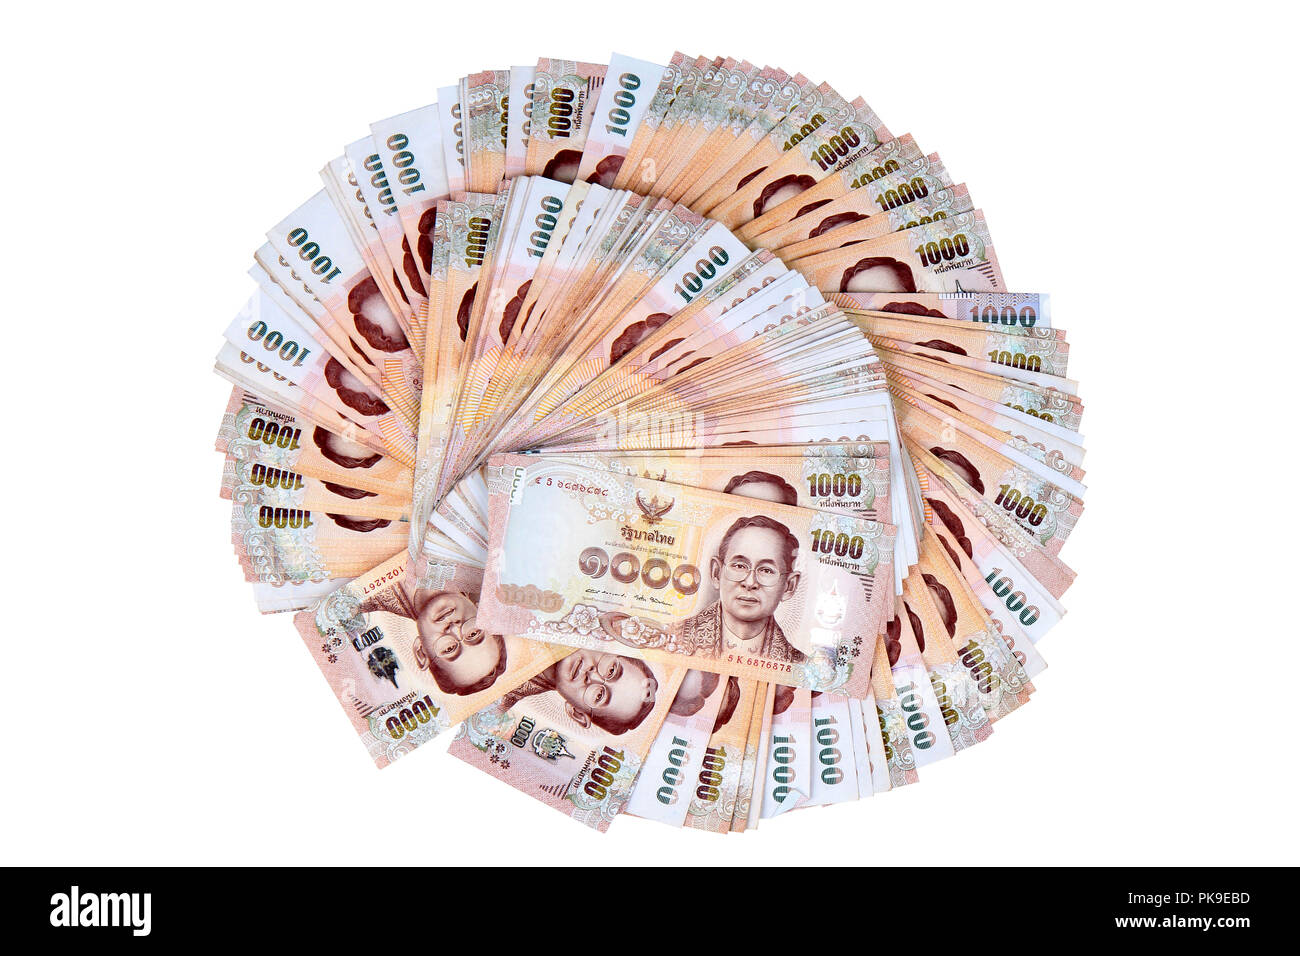 Currency the 1000 Baht of Thailand banknotes lay spread double. Stock Photo